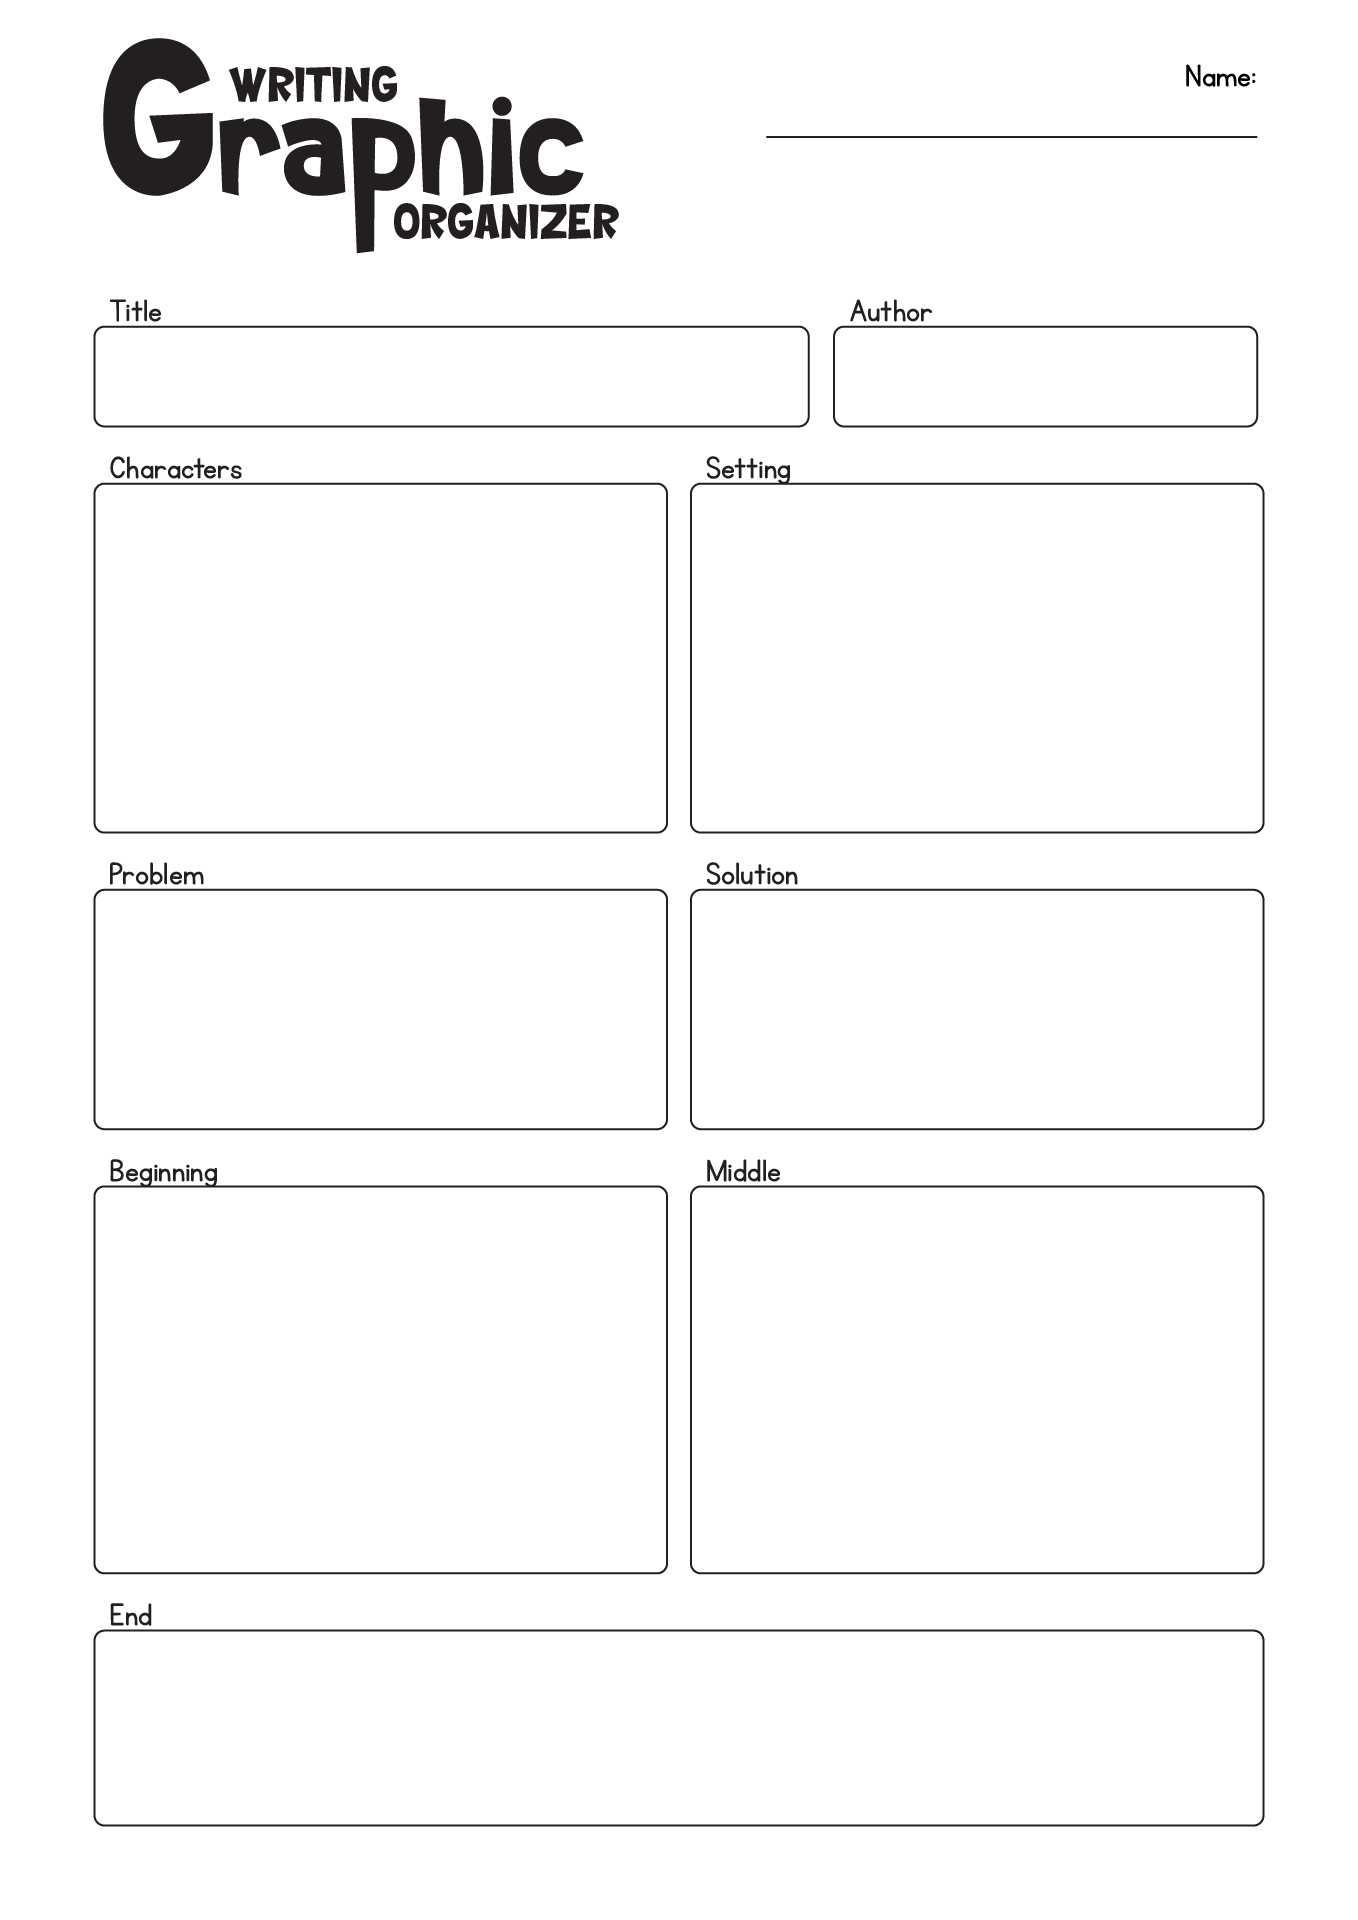 14 Best Images of Chapter Reading Summary Worksheets - Chapter Summary